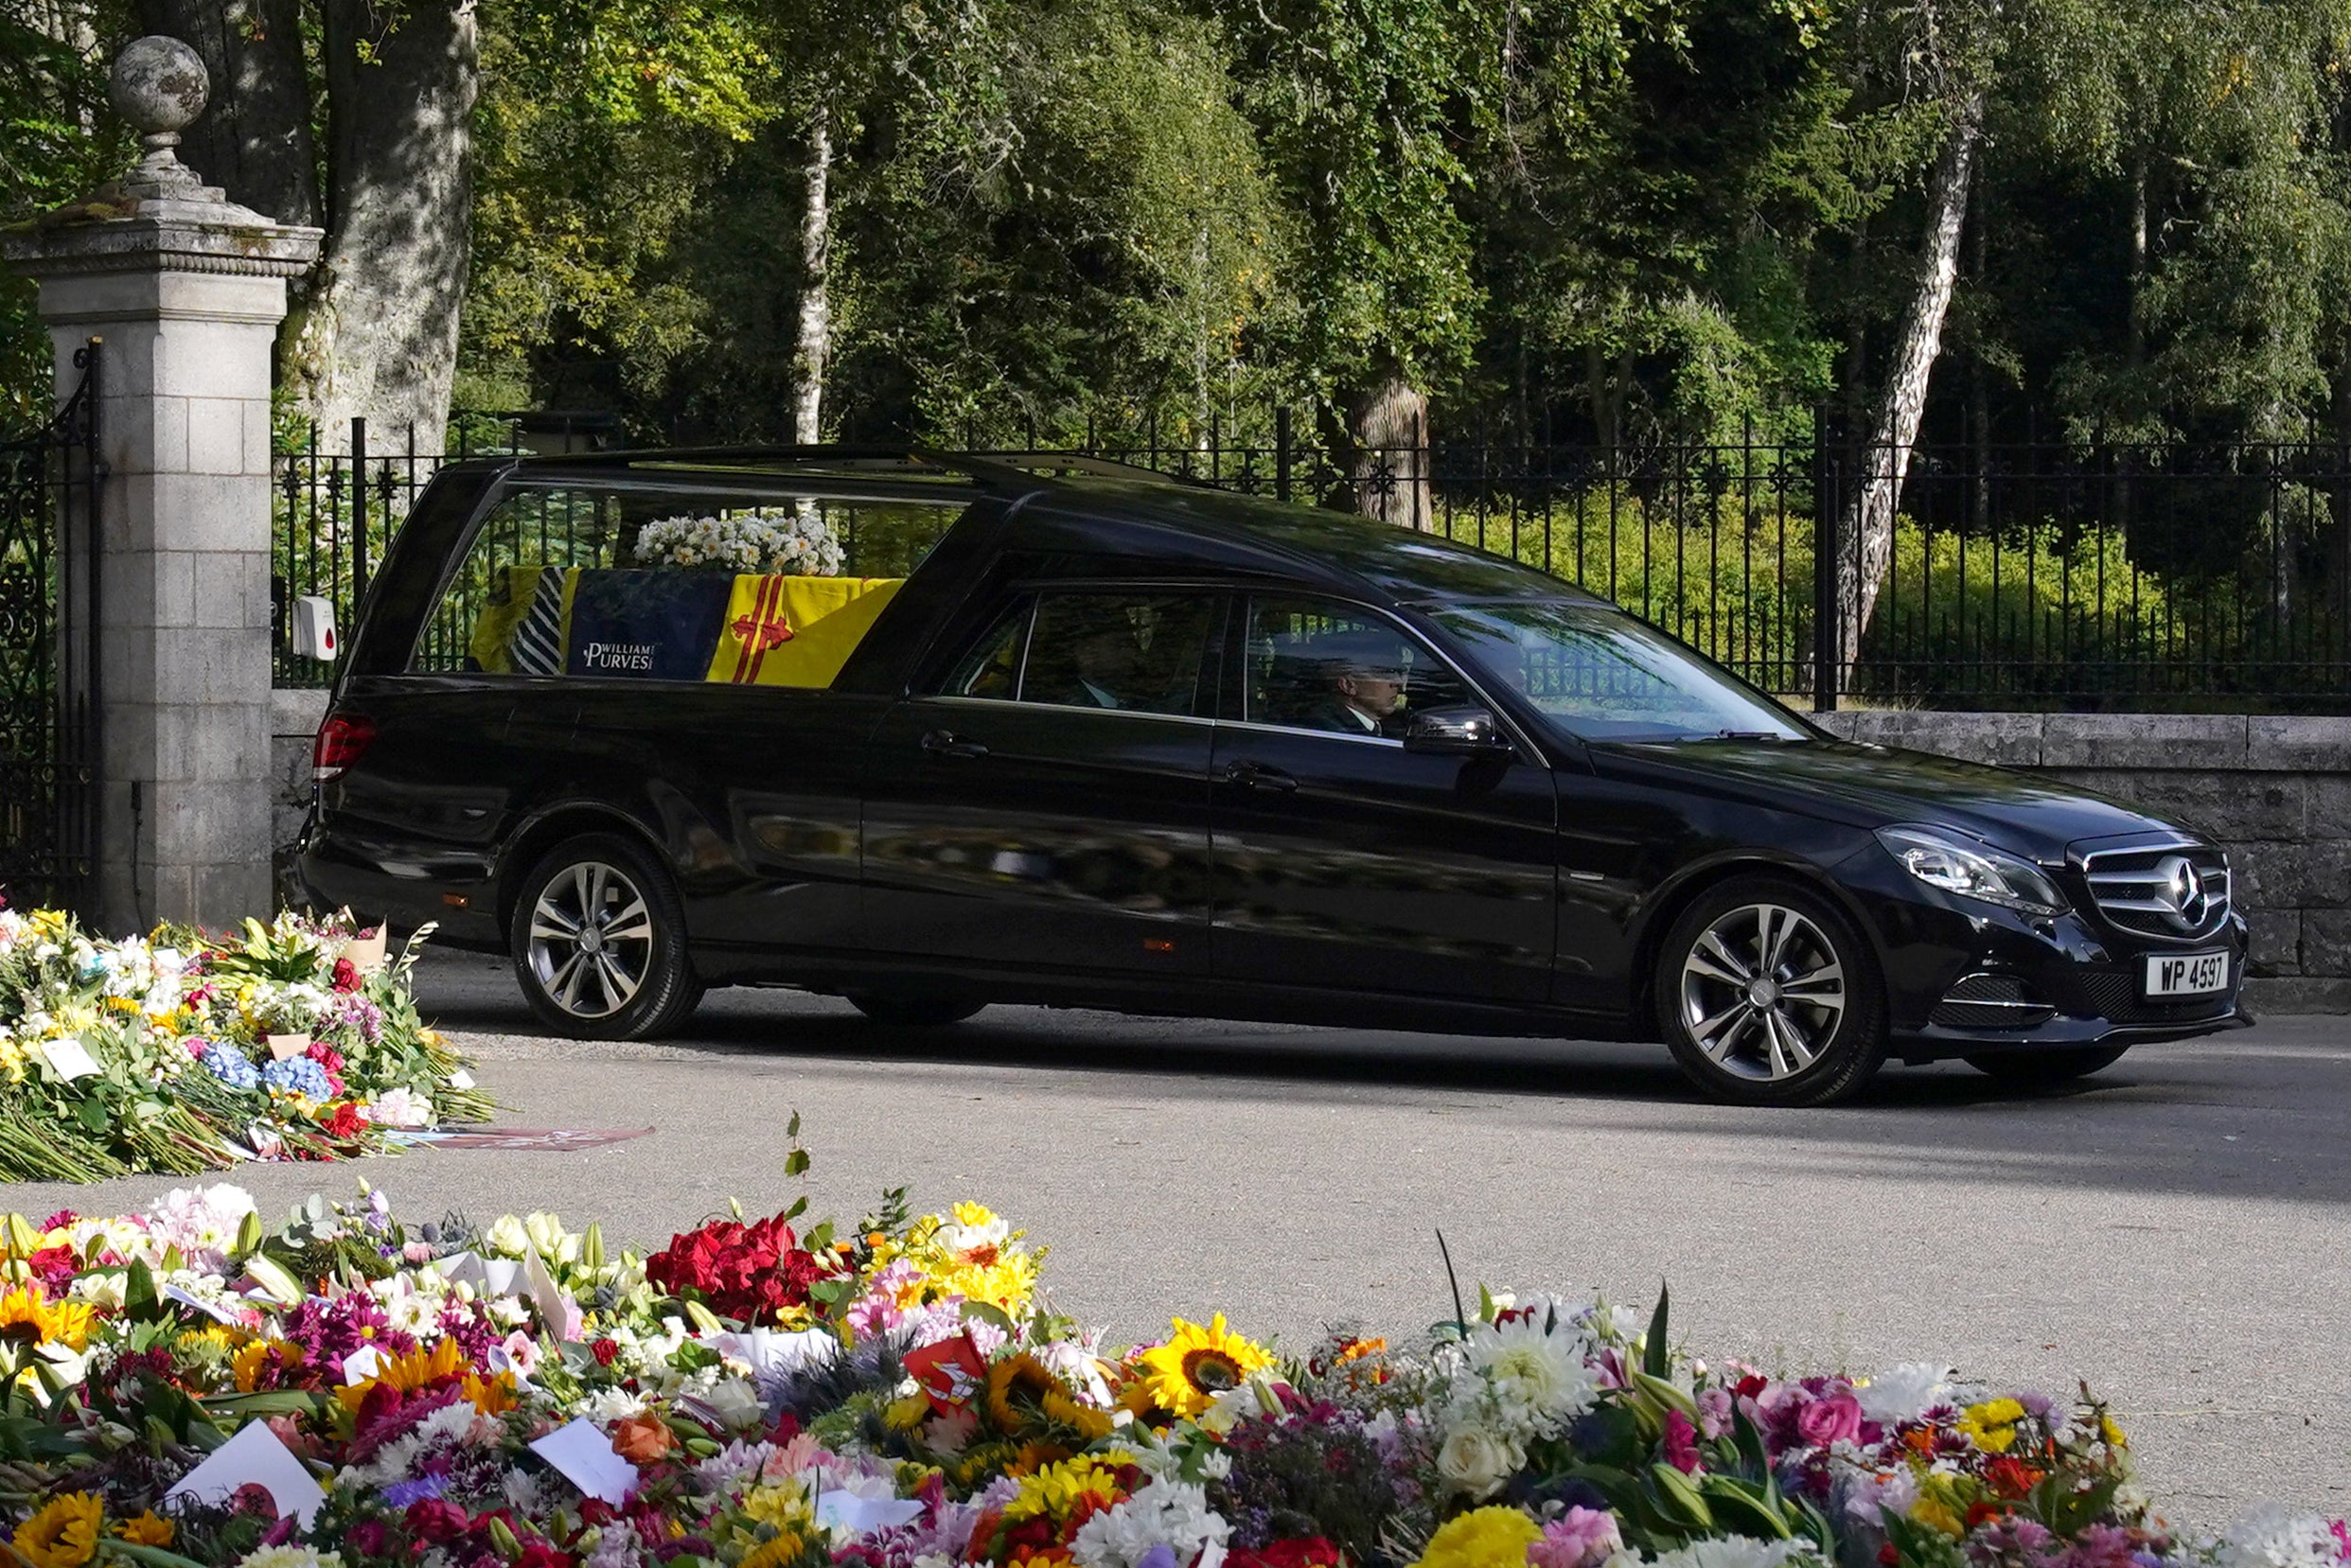 The hearse carrying the coffin of Queen Elizabeth II left Balmoral on Sunday morning. (Owen Humphreys/PA)